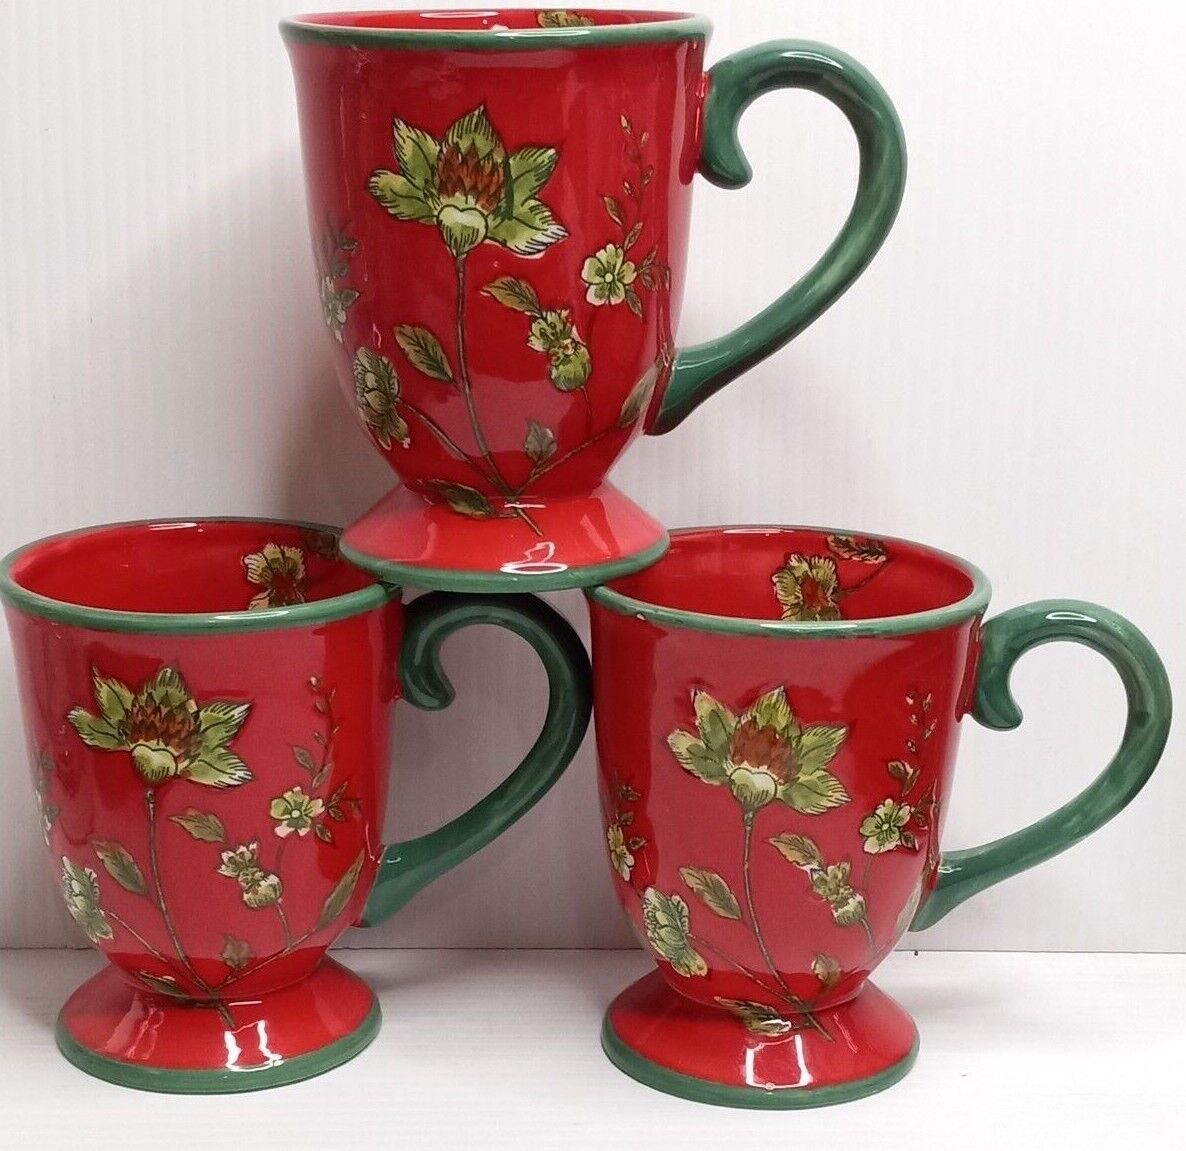 Floral Footed Coffee Cup/Mug 16oz. Red and Green Set of Three